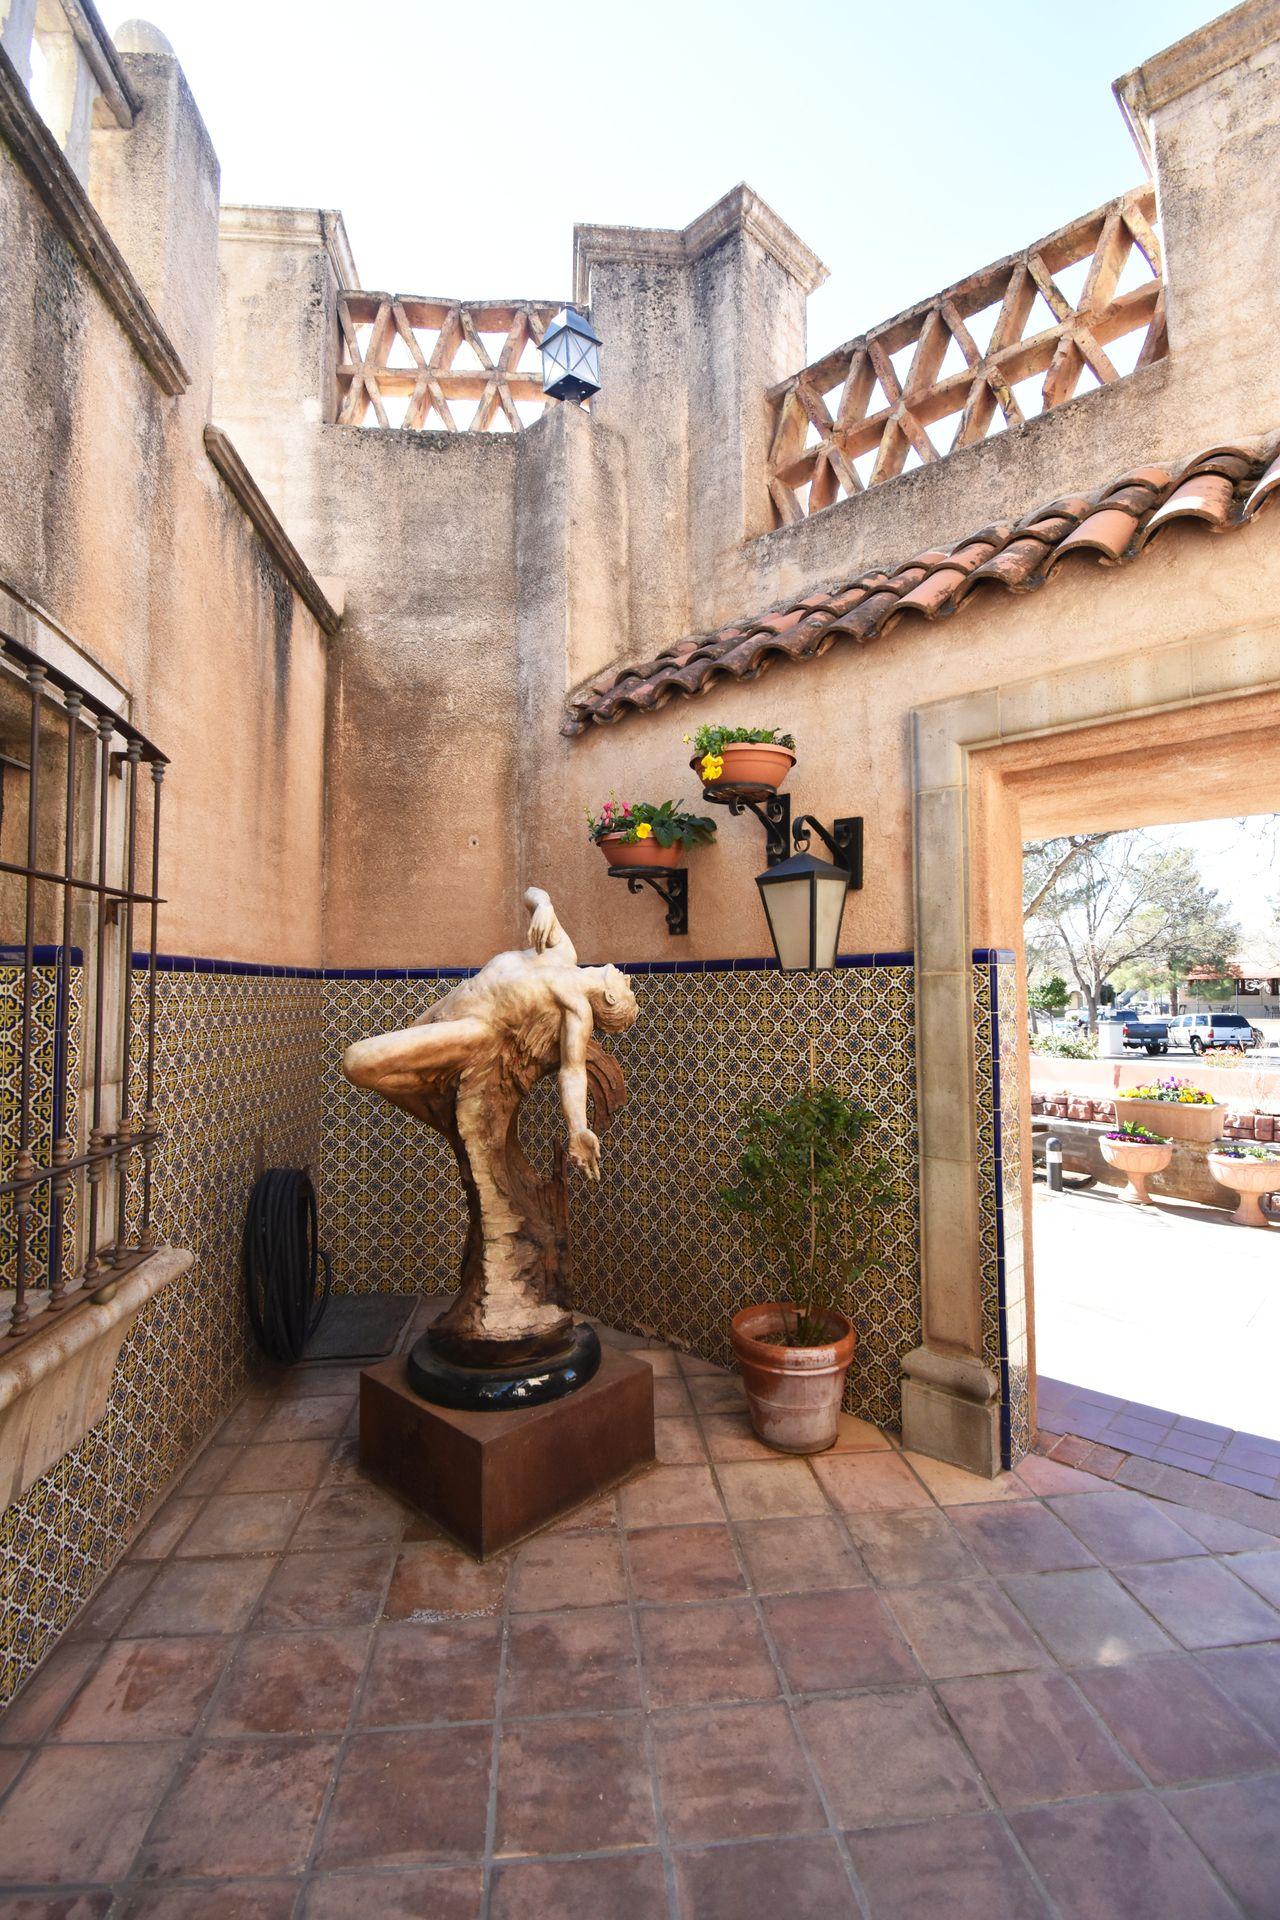 A statue in Tlaquepaque Shopping Village in a corner. The wall behind the statue is half covered in intricately designed tiles.